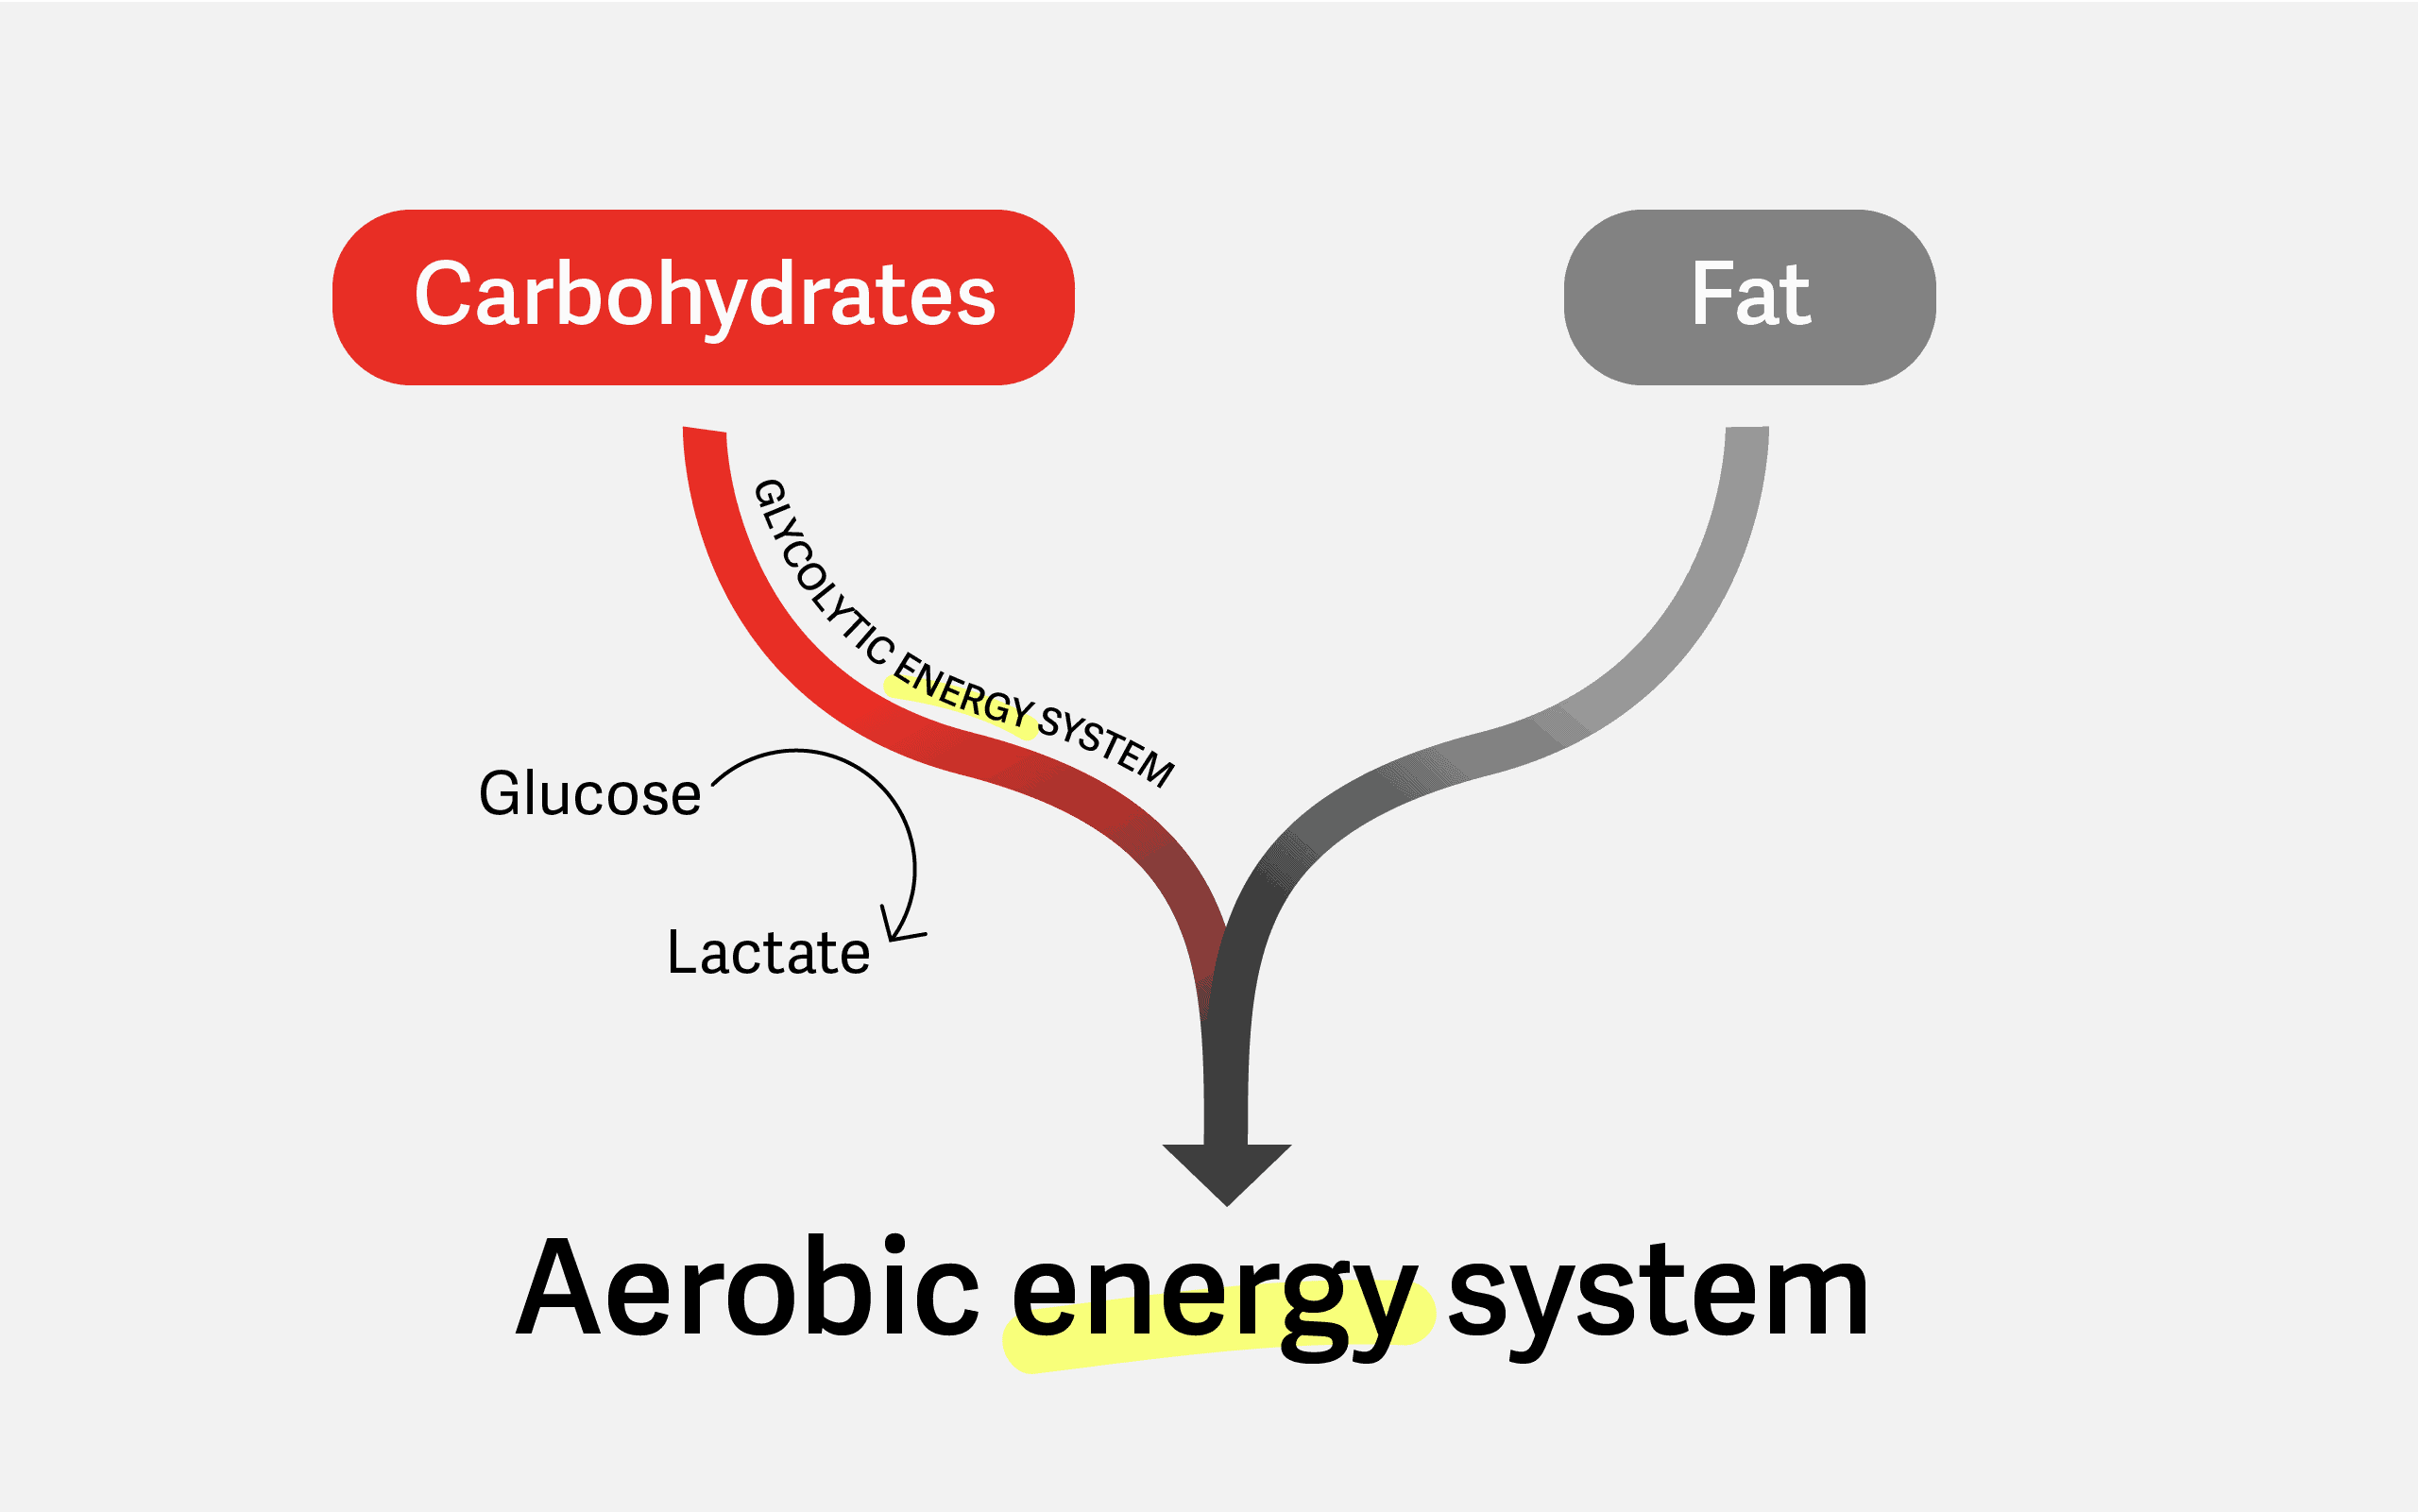 Carbohydrate and fat energy metabolism